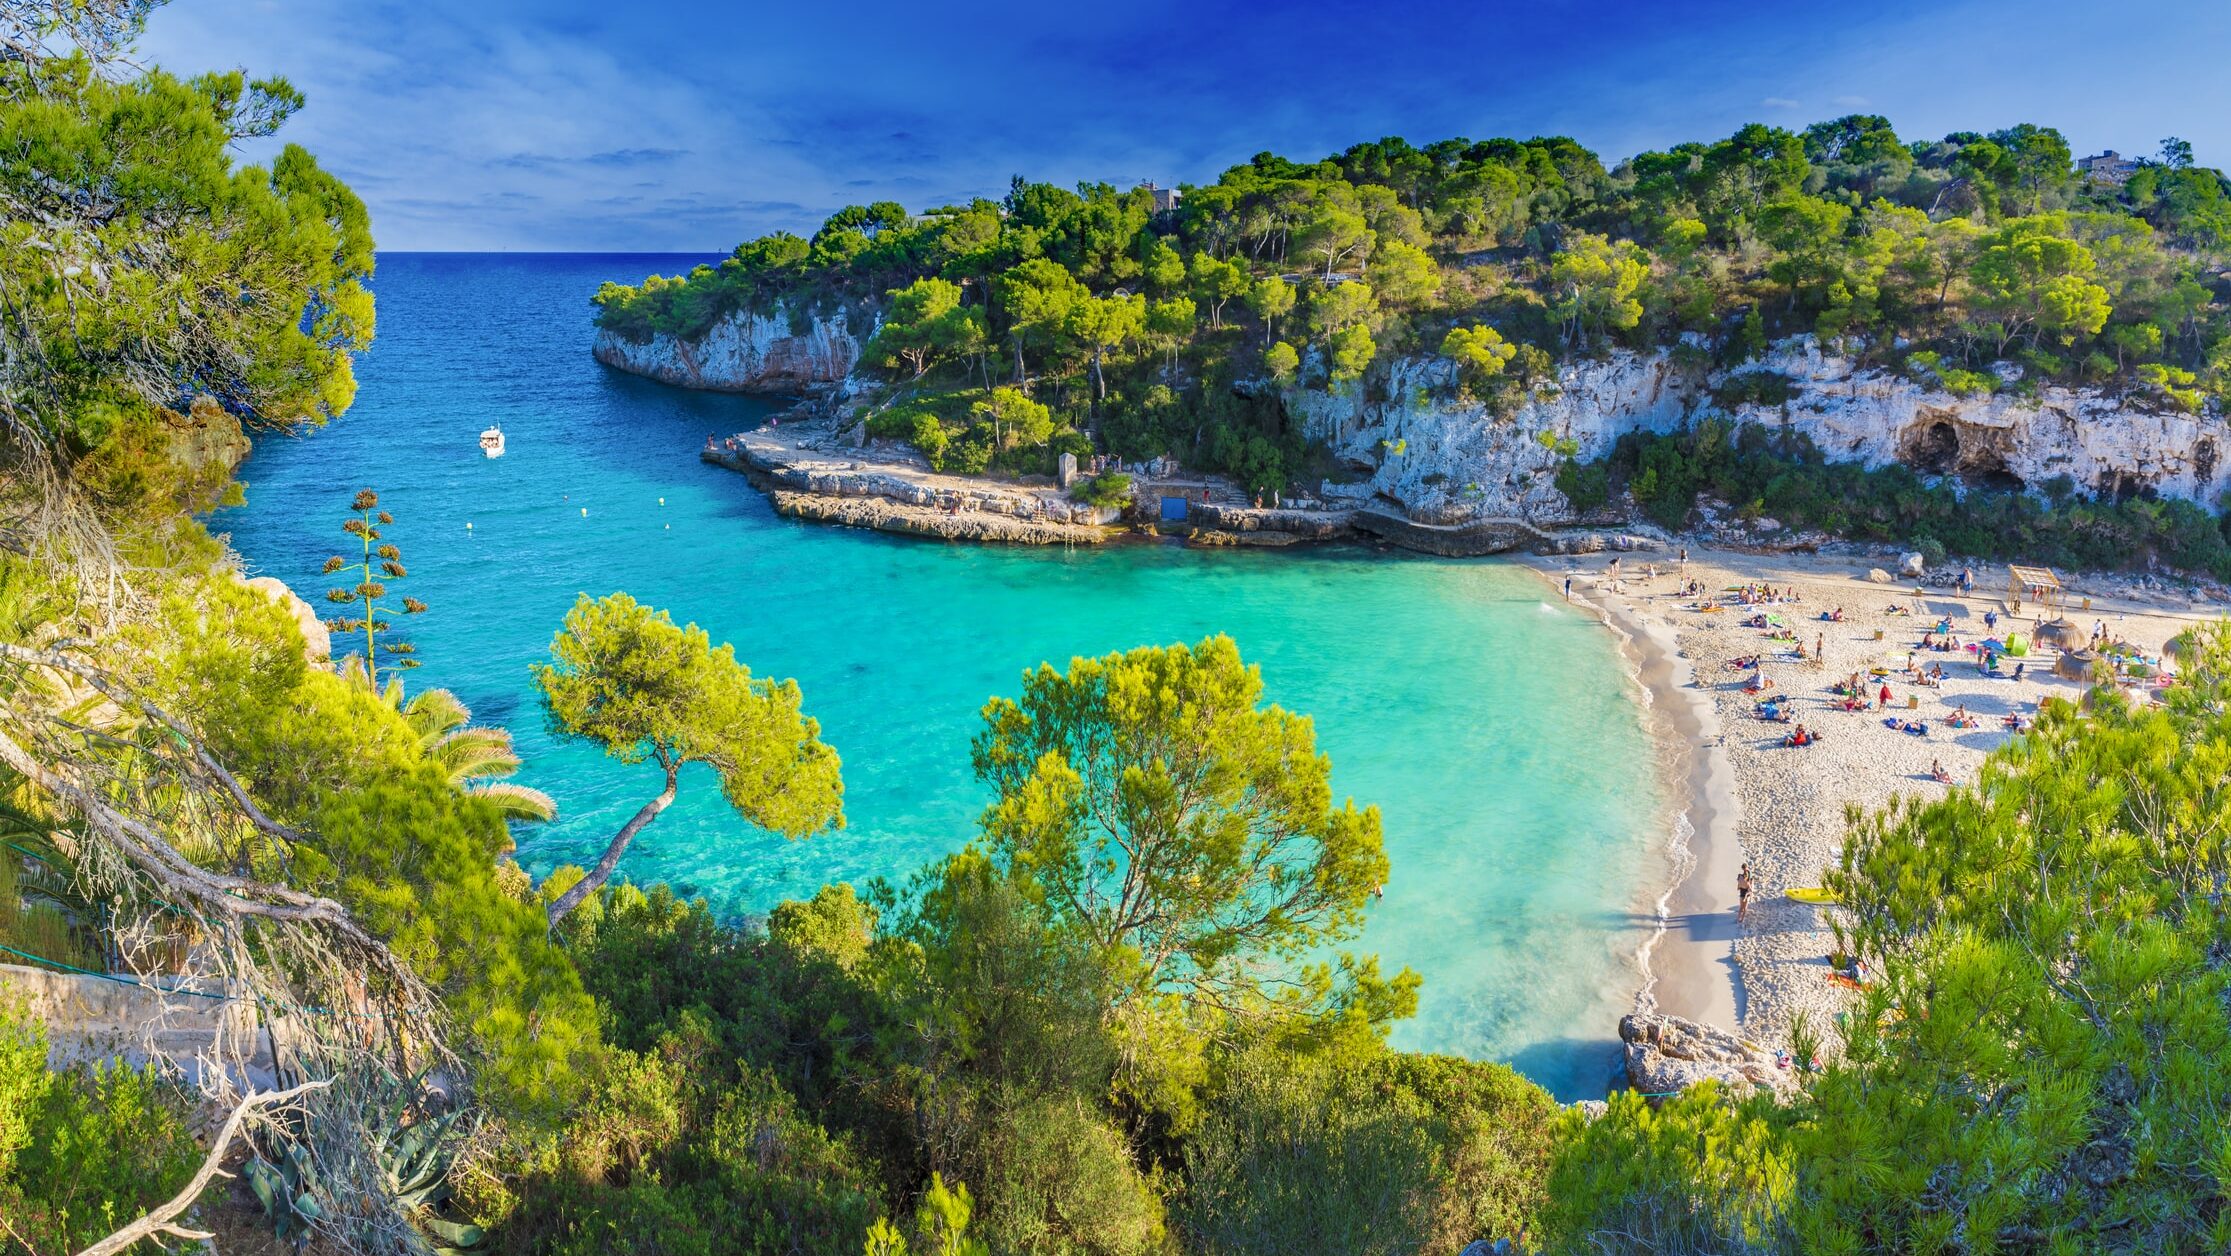 Cala Llombards, Majorca island, Spain
Best time to visit Spain